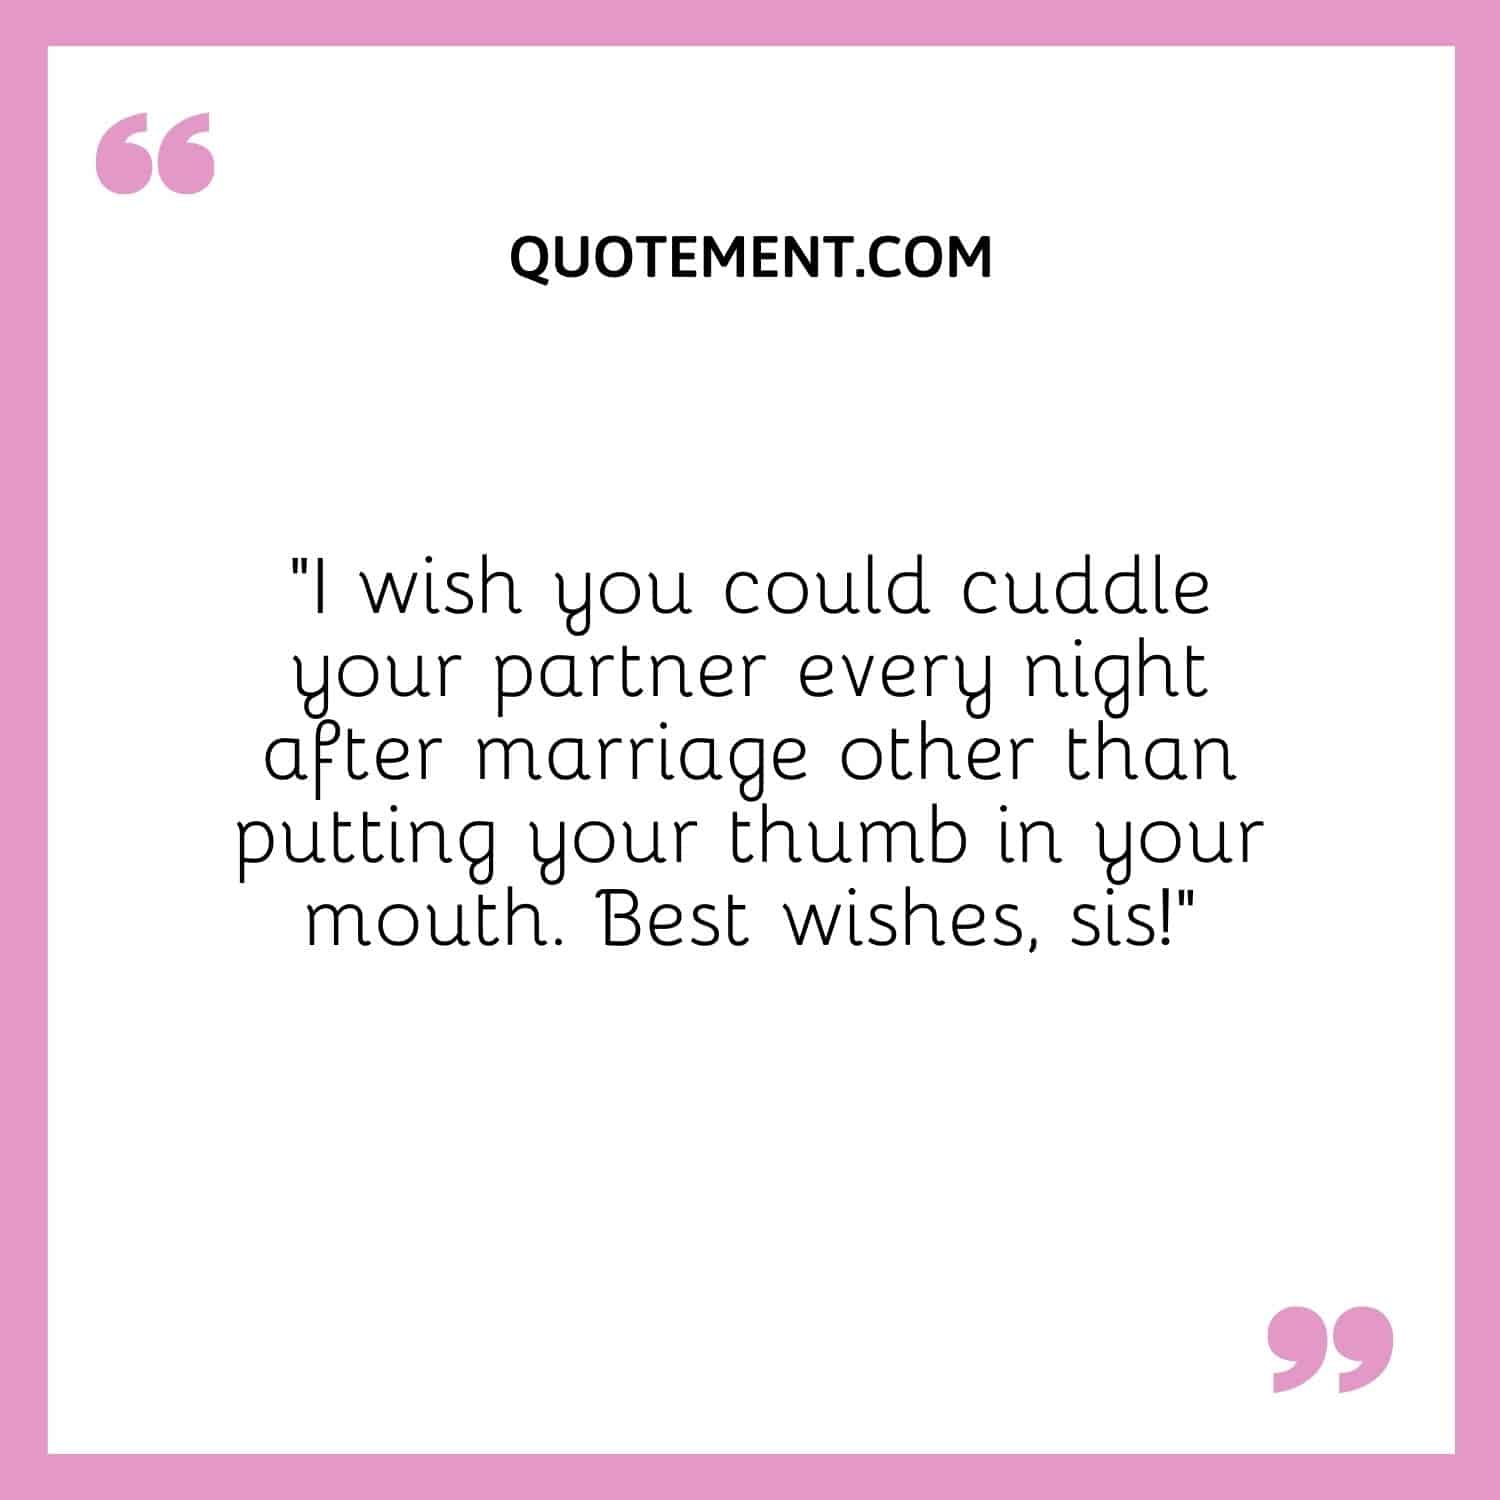 I wish you could cuddle your partner every night after marriage other than putting your thumb in your mouth